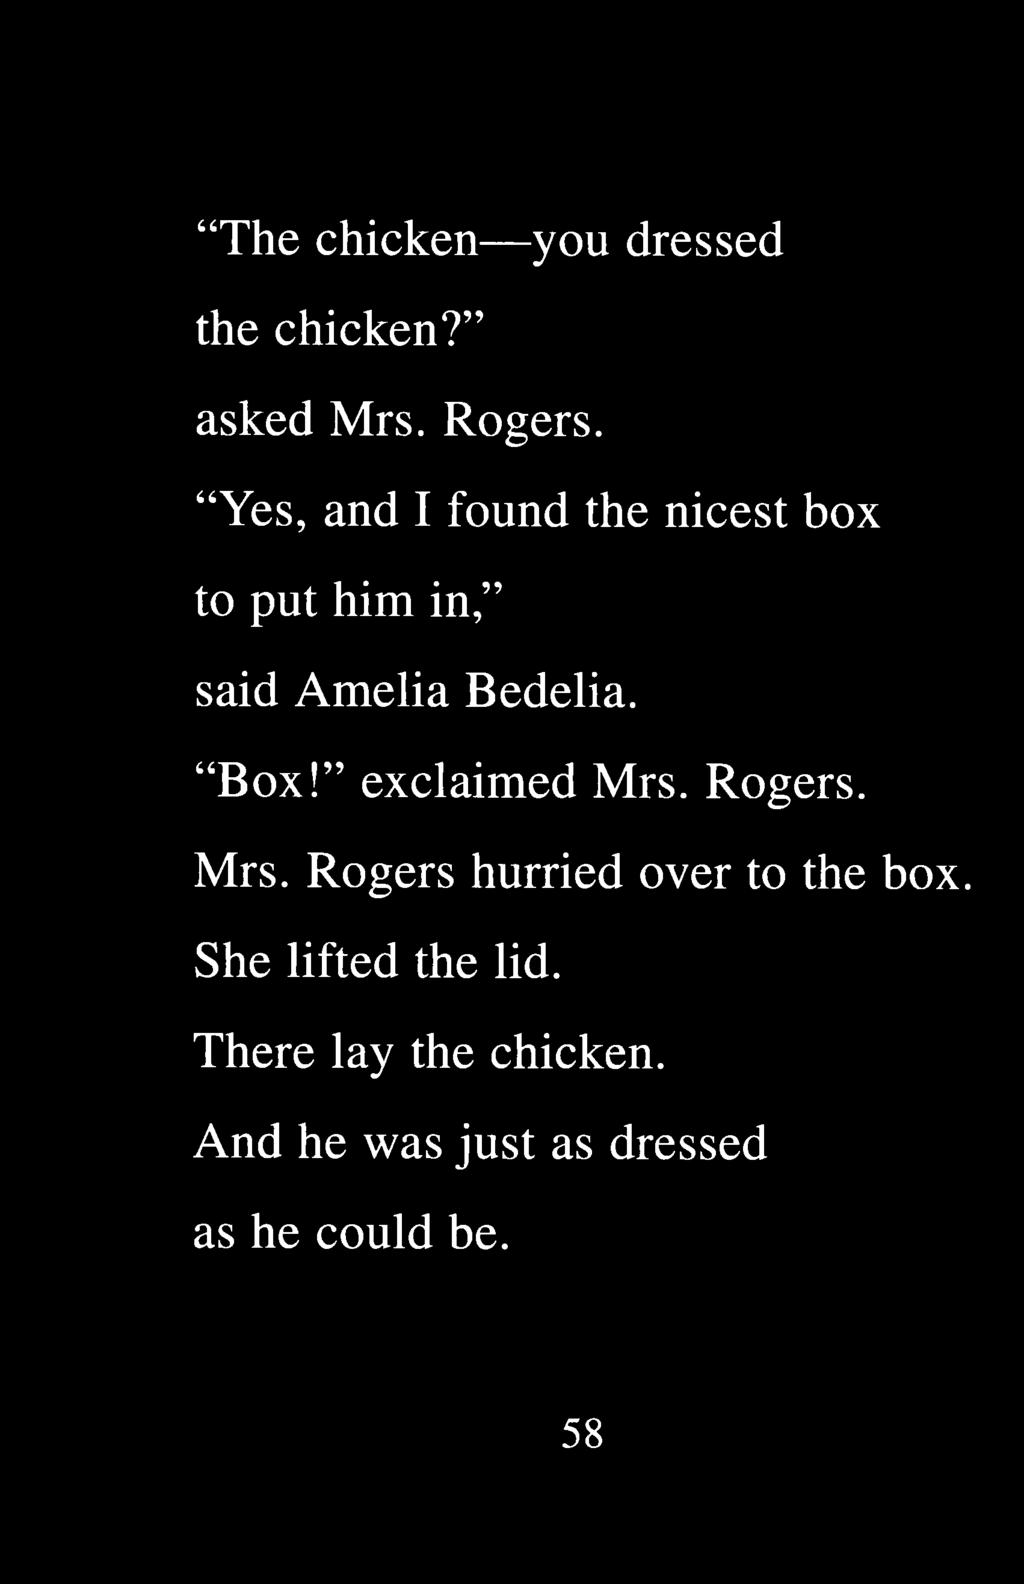 Rogers. Mrs. Rogers hurried over to the box.